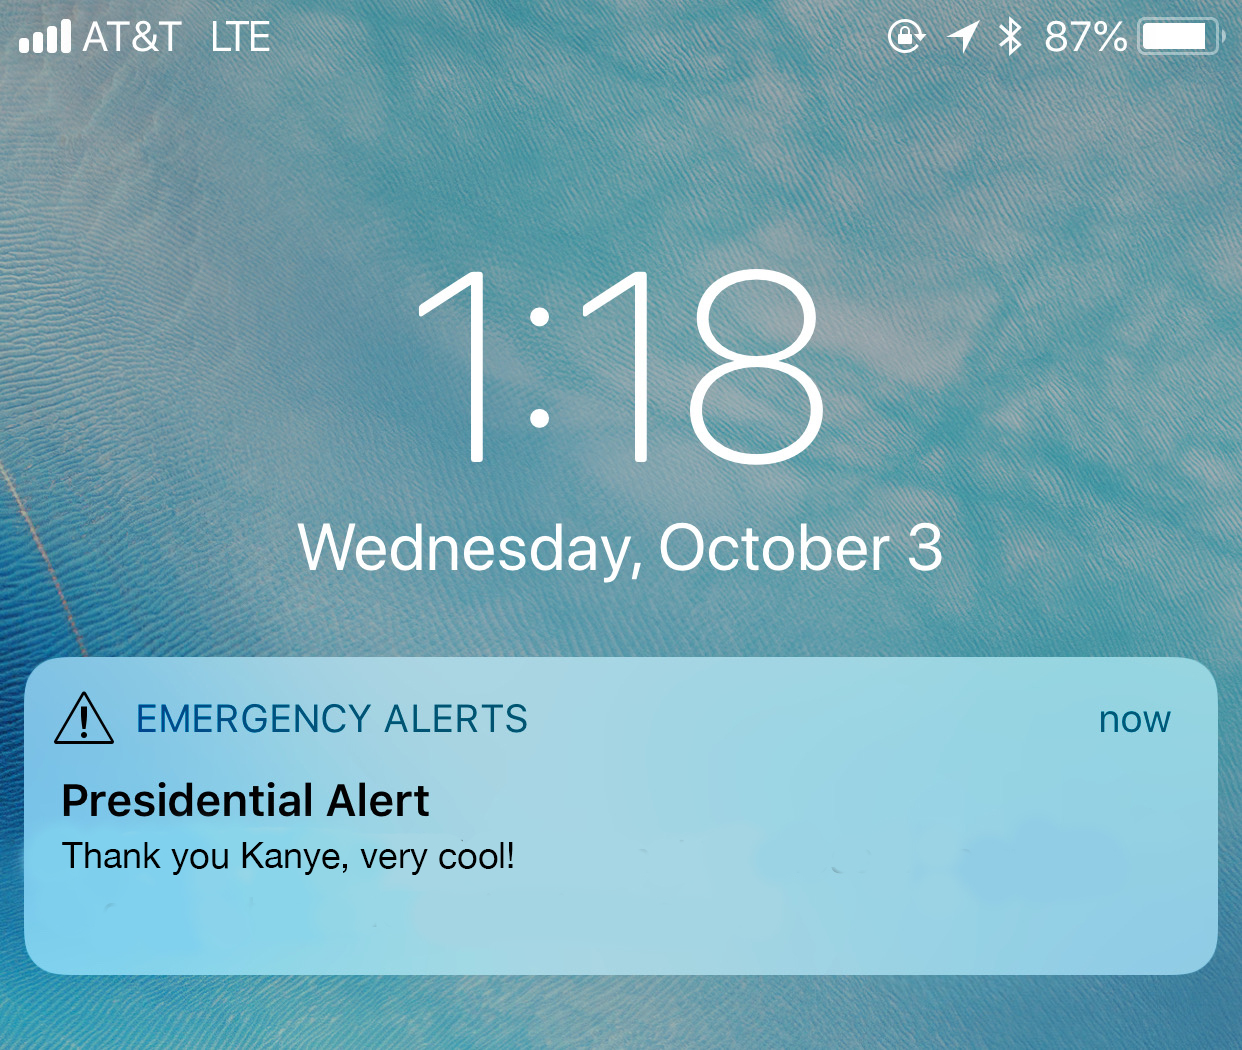 Trump meme of presidential alert meme template - ... At&T Lte @ 1 87% Wednesday, October 3 now A Emergency Alerts Presidential Alert Thank you Kanye, very cool!